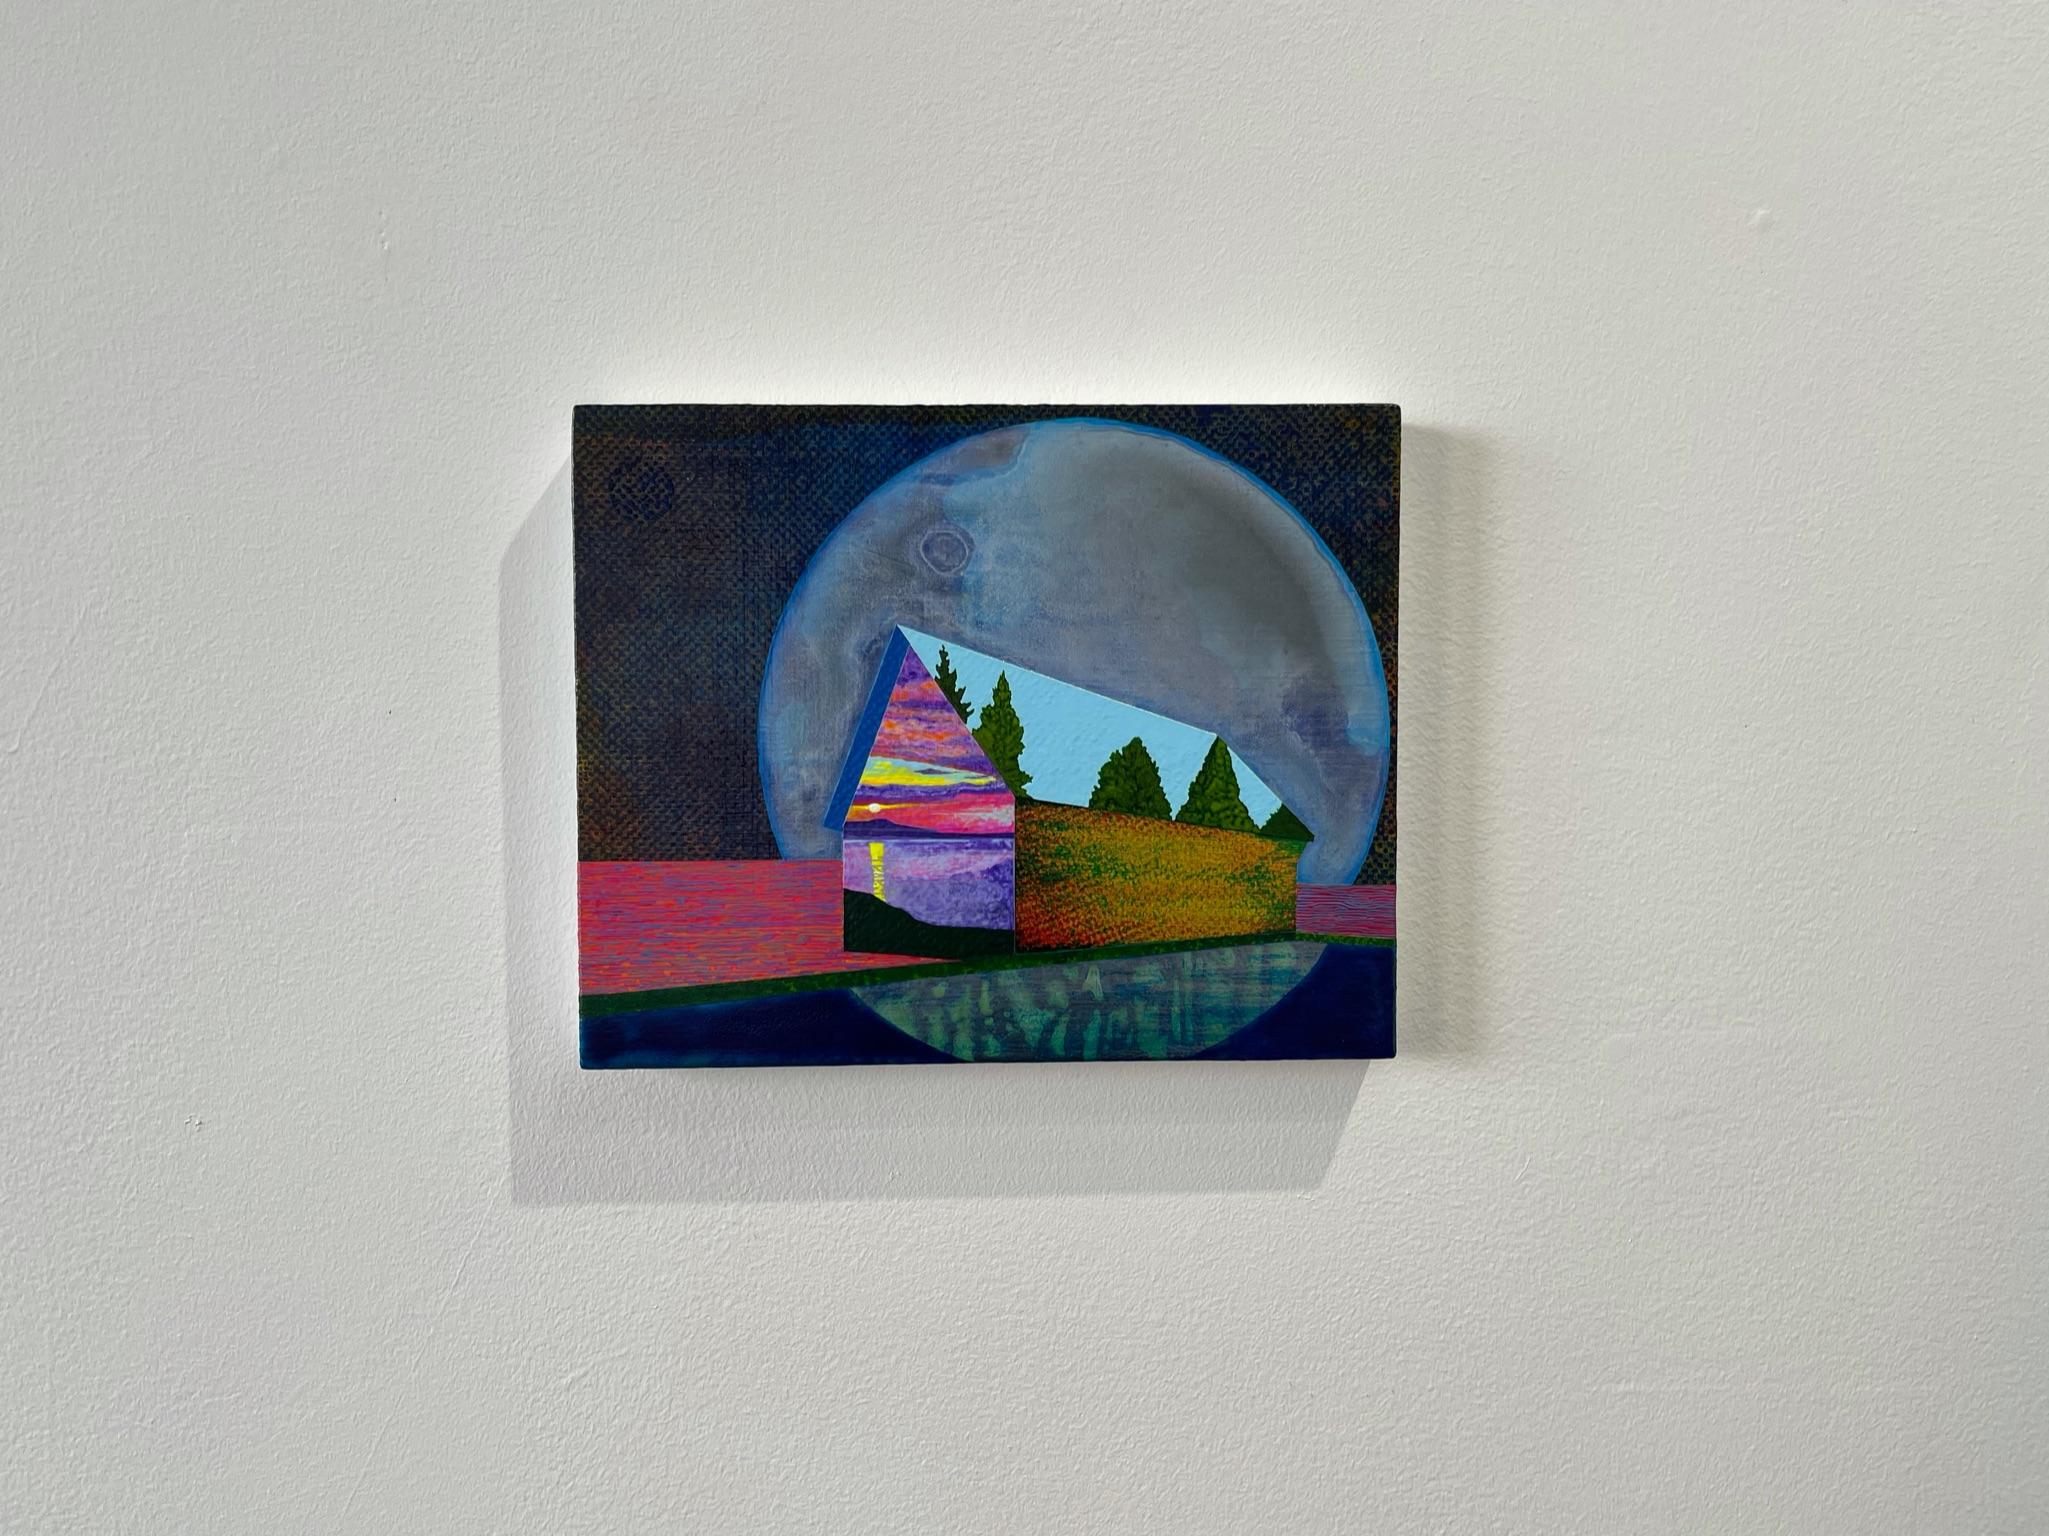 Apparition, surreal painting of house against purple moon, reflections 2